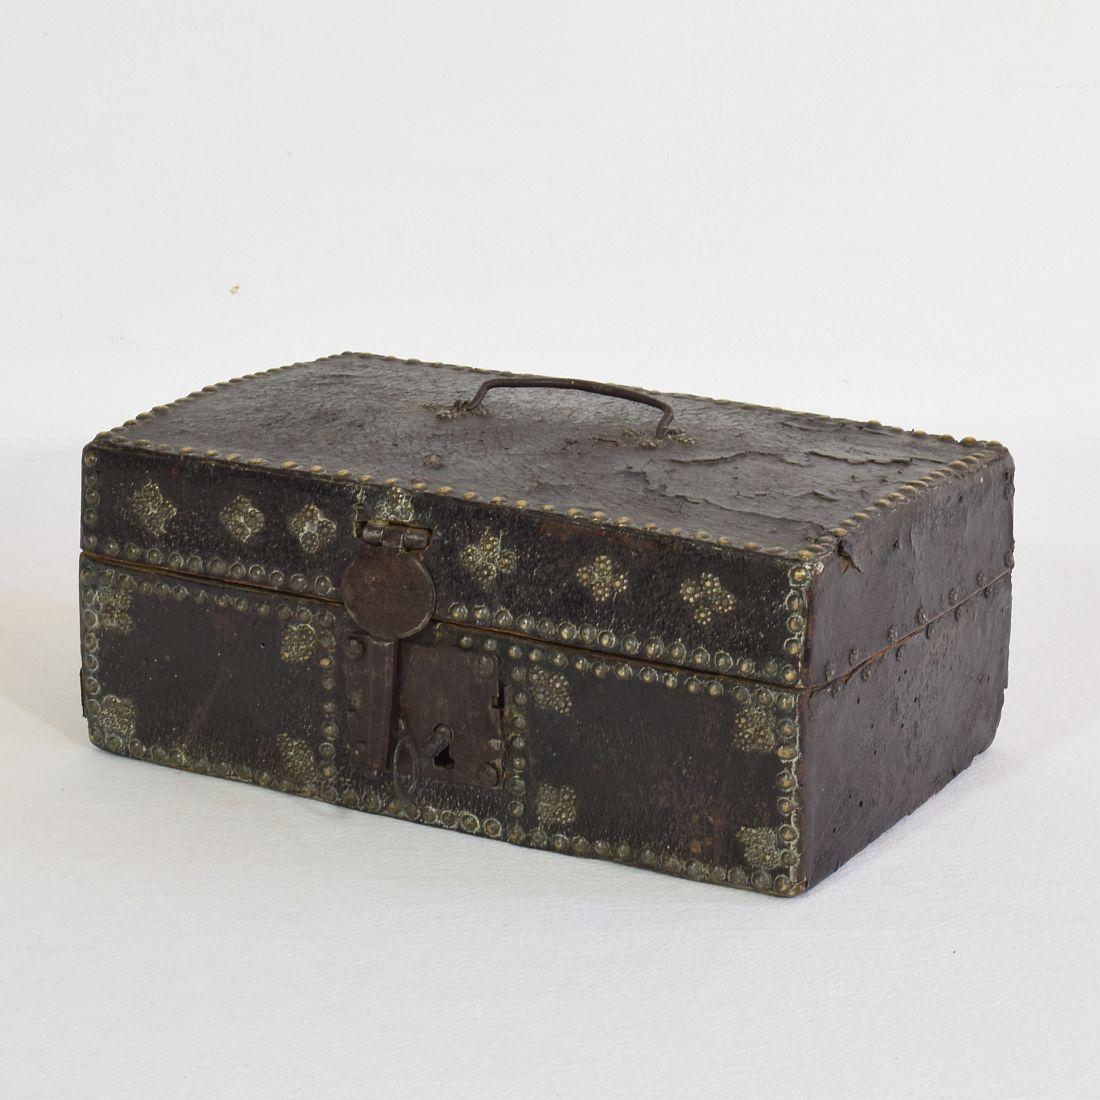 Forged Small 17th Century, French Coffer or Box in Leather